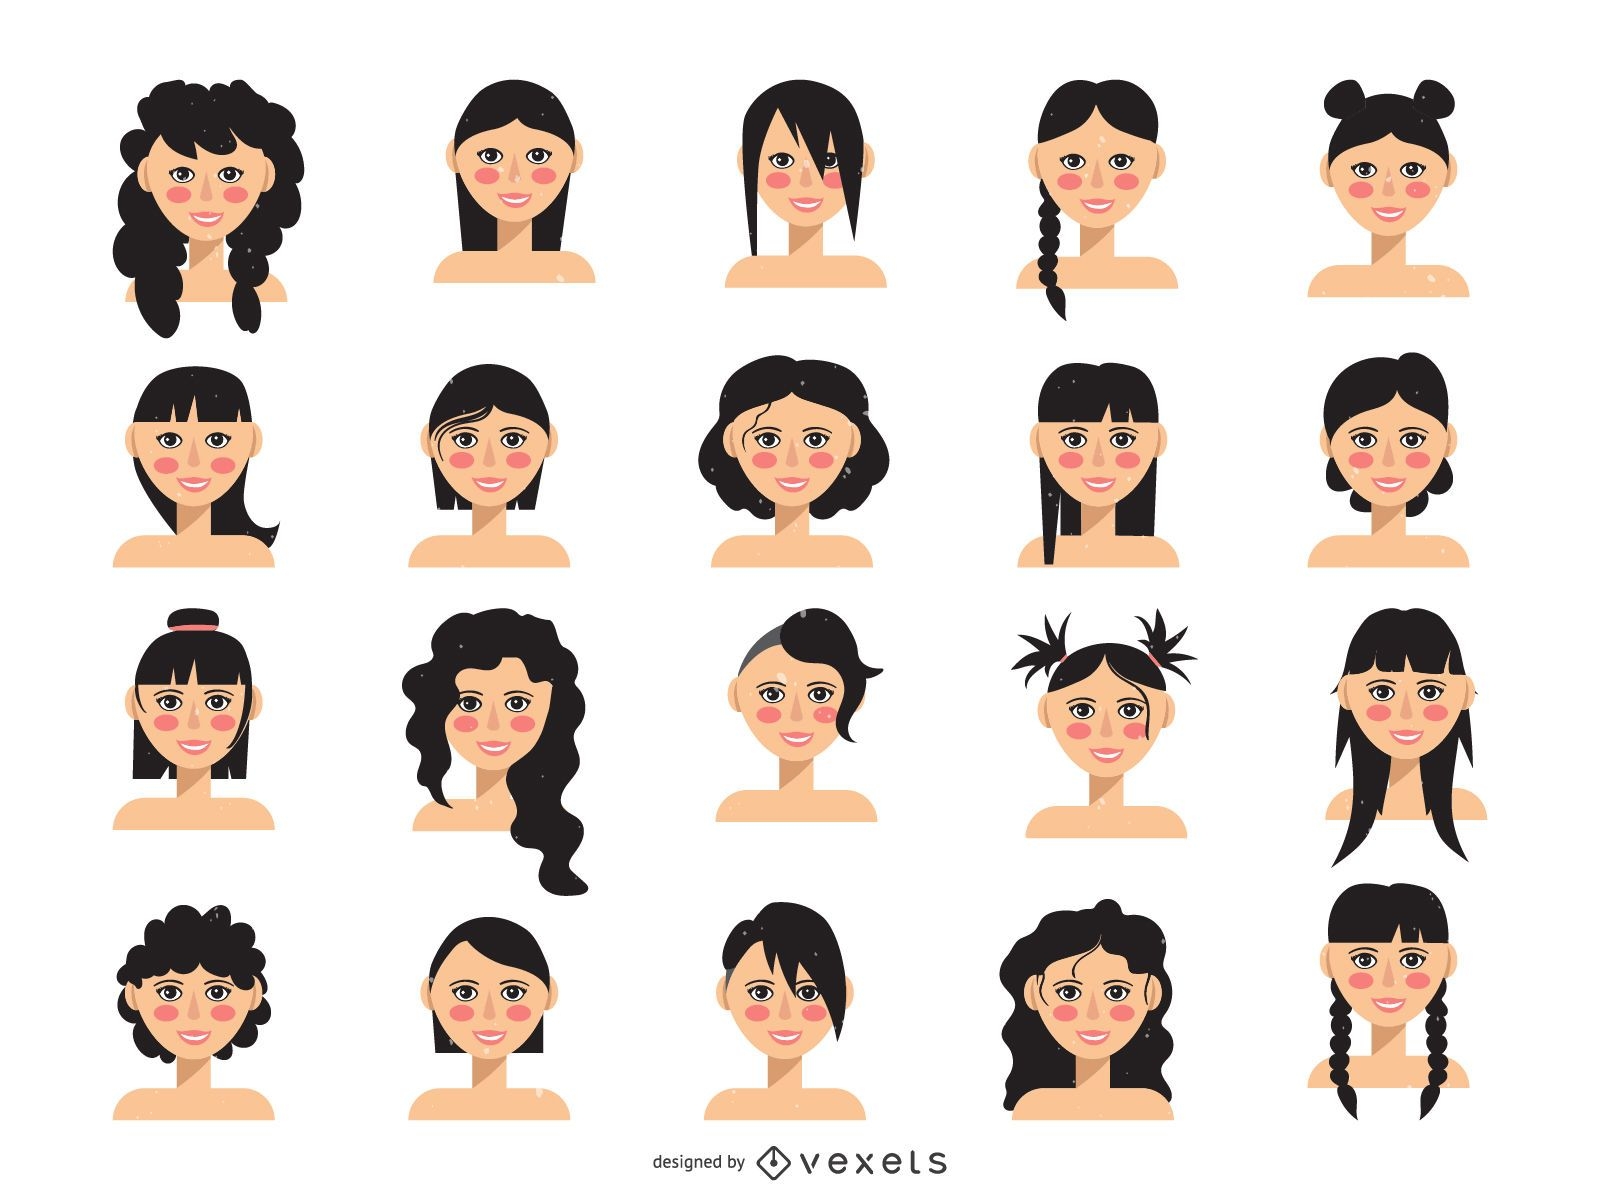 Cheerful People Avatar Collection User Faces Stock Vector Royalty Free  1309550005  Shutterstock